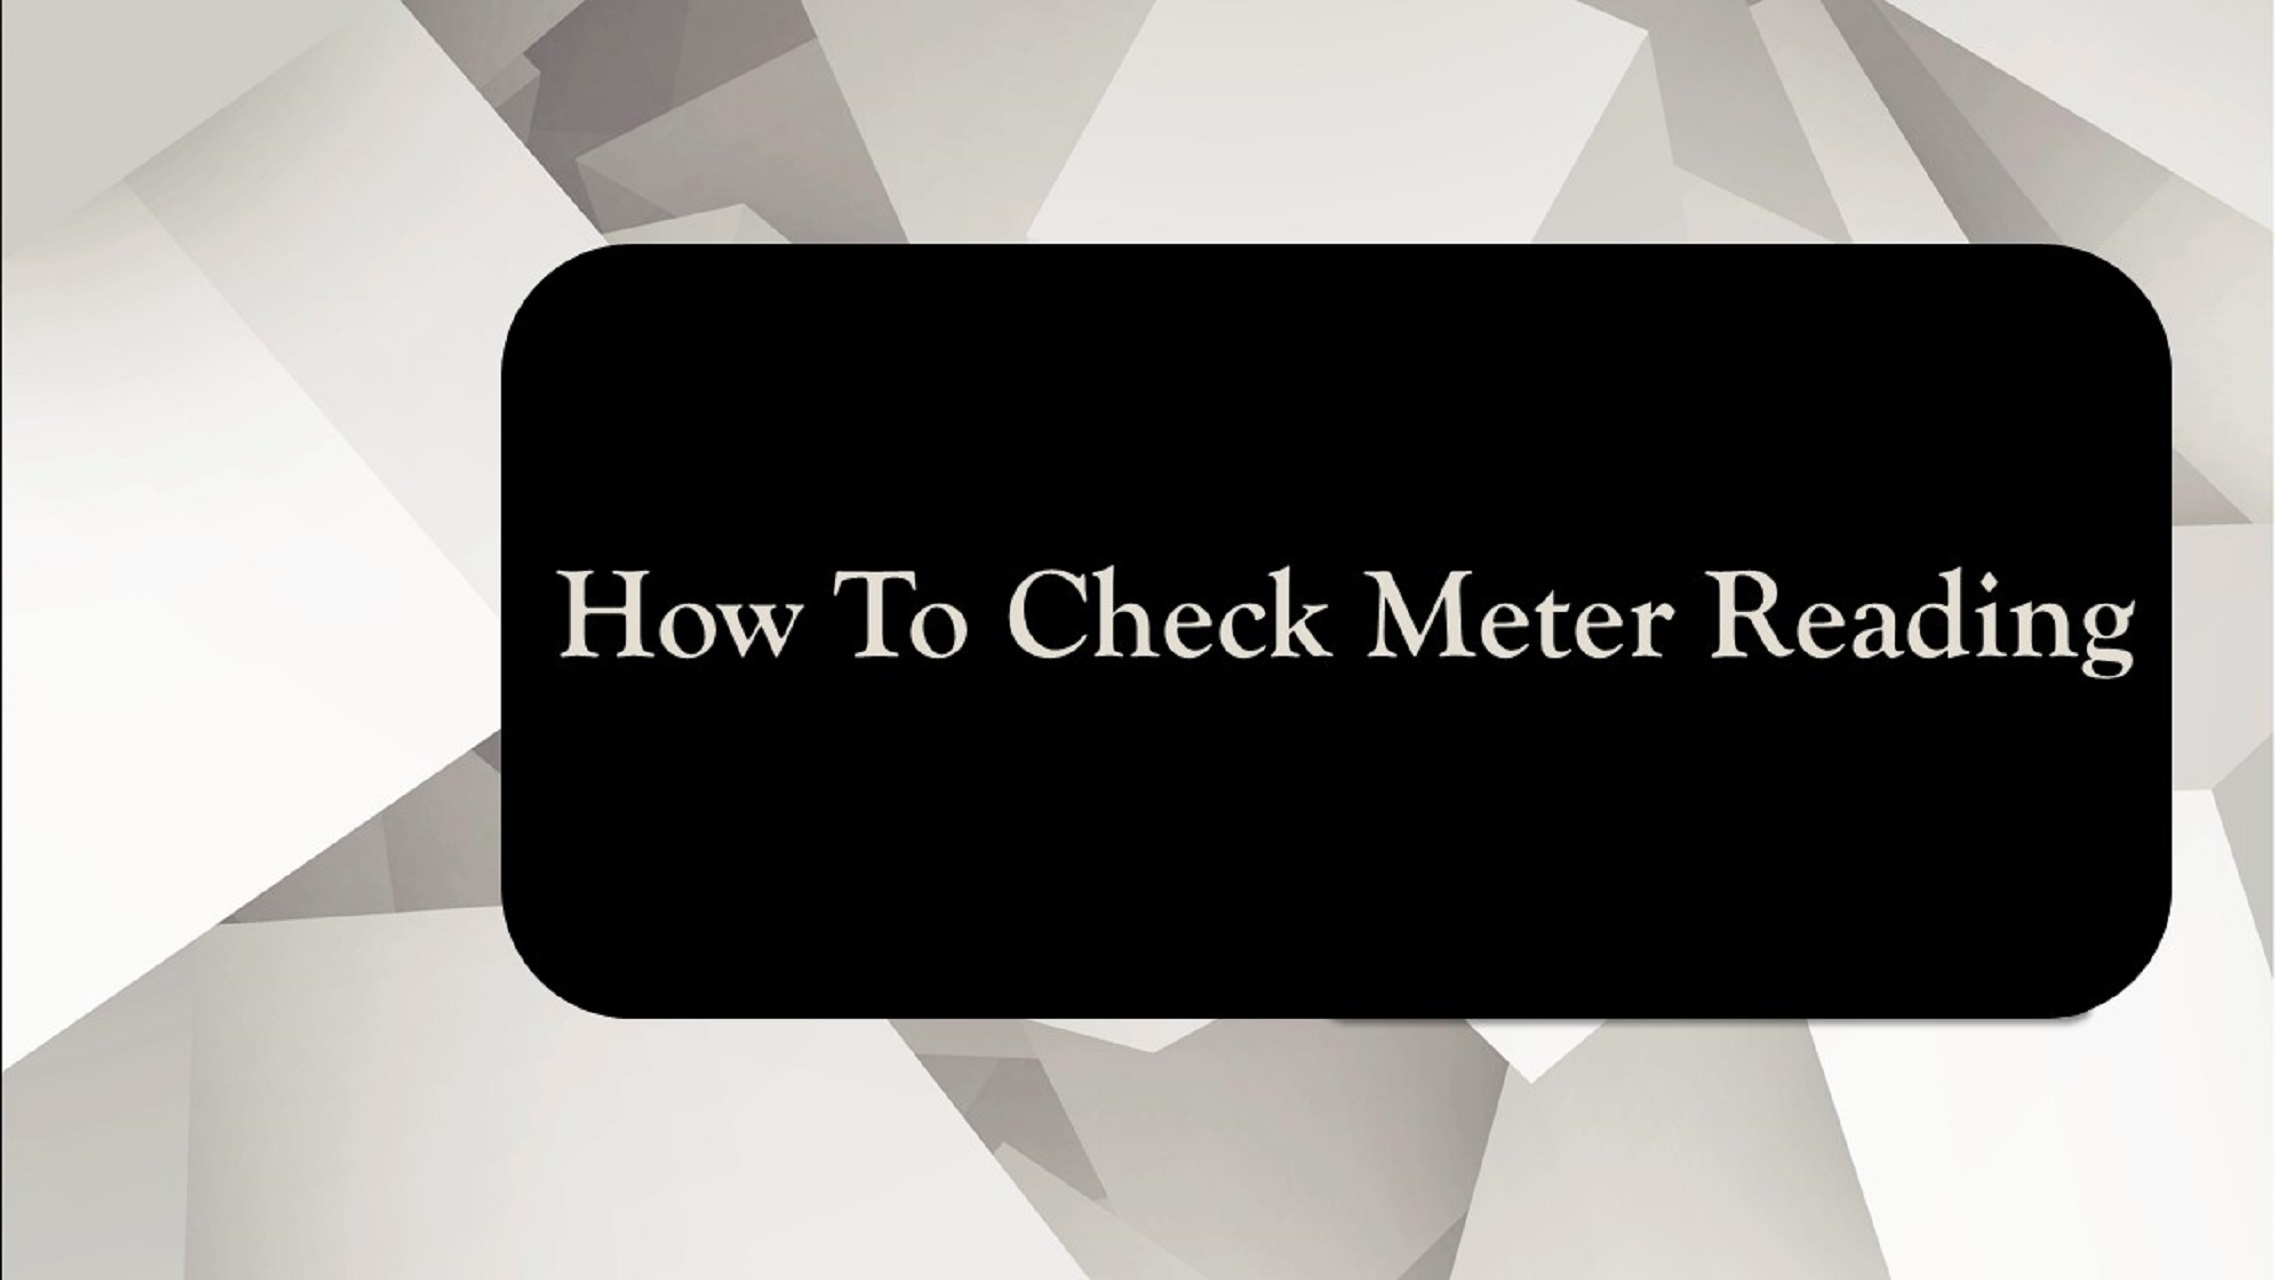 How To Check Meter Reading